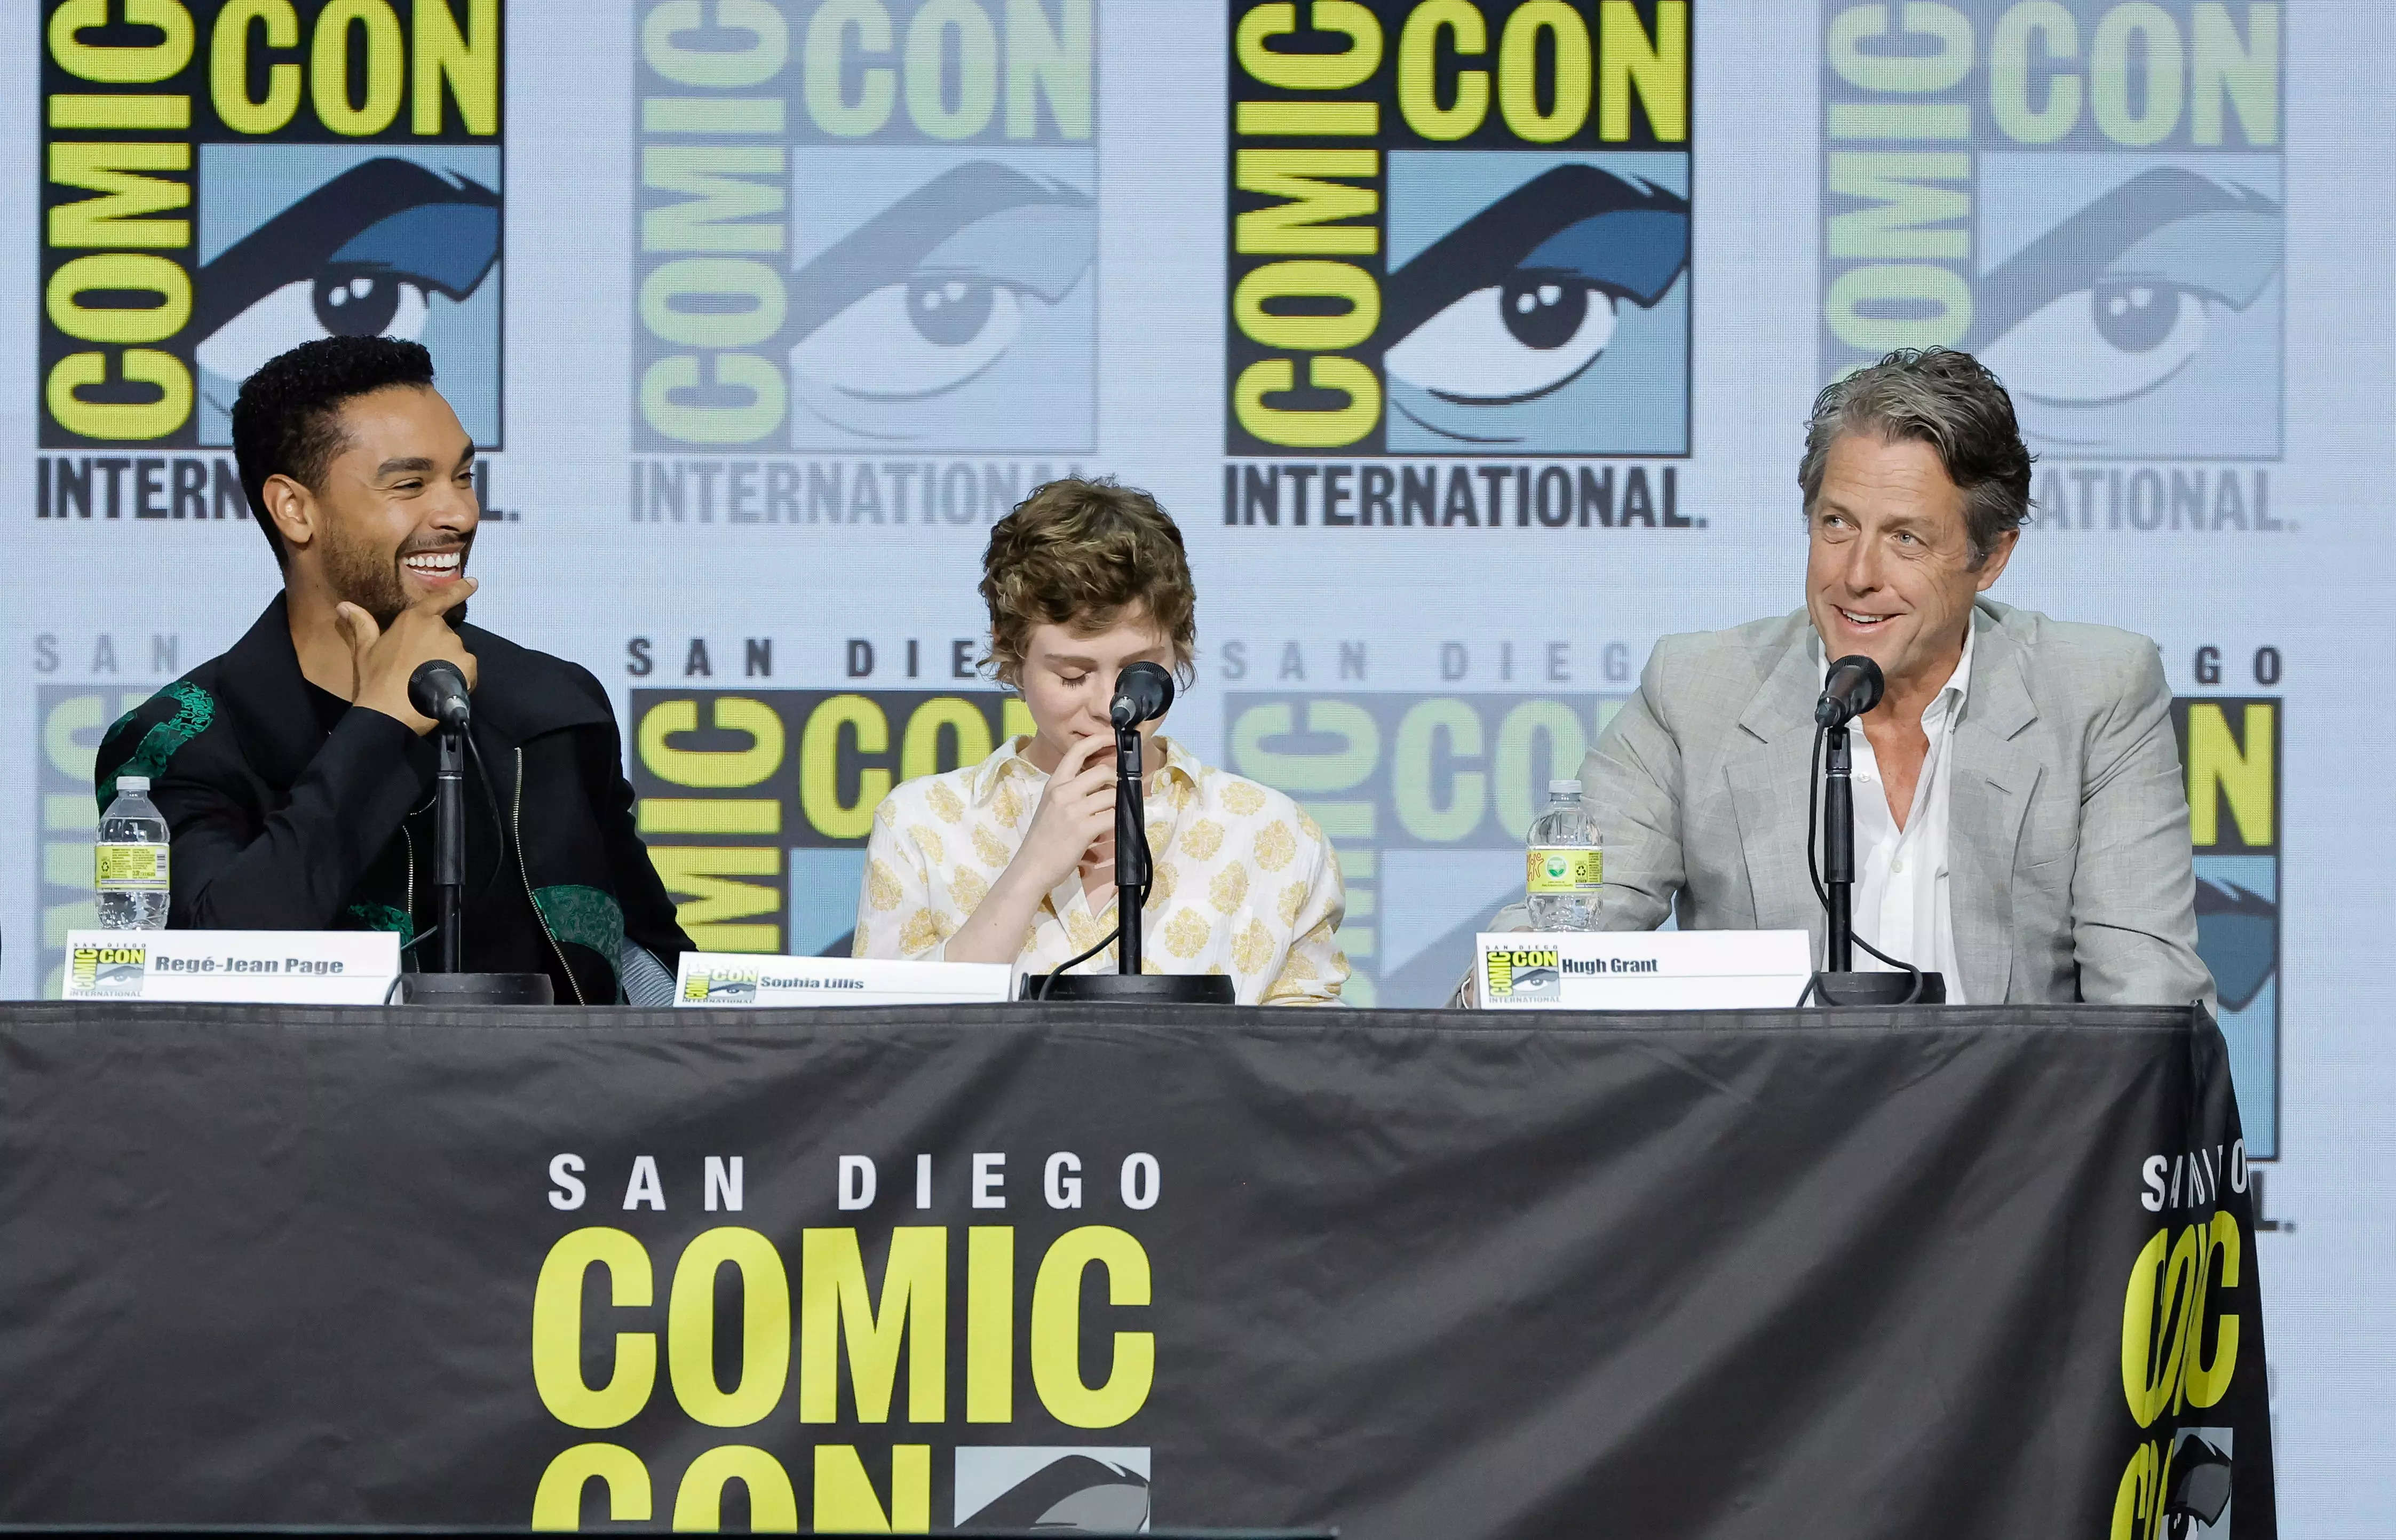 (L-R) Regé-Jean Page, Sophia Lillis, and Hugh Grant speak onstage at the "Dungeons & Dragons: Honor Among Thieves" panel during 2022 Comic-Con International: San Diego at San Diego Convention Center on July 21, 2022 in San Diego, California.